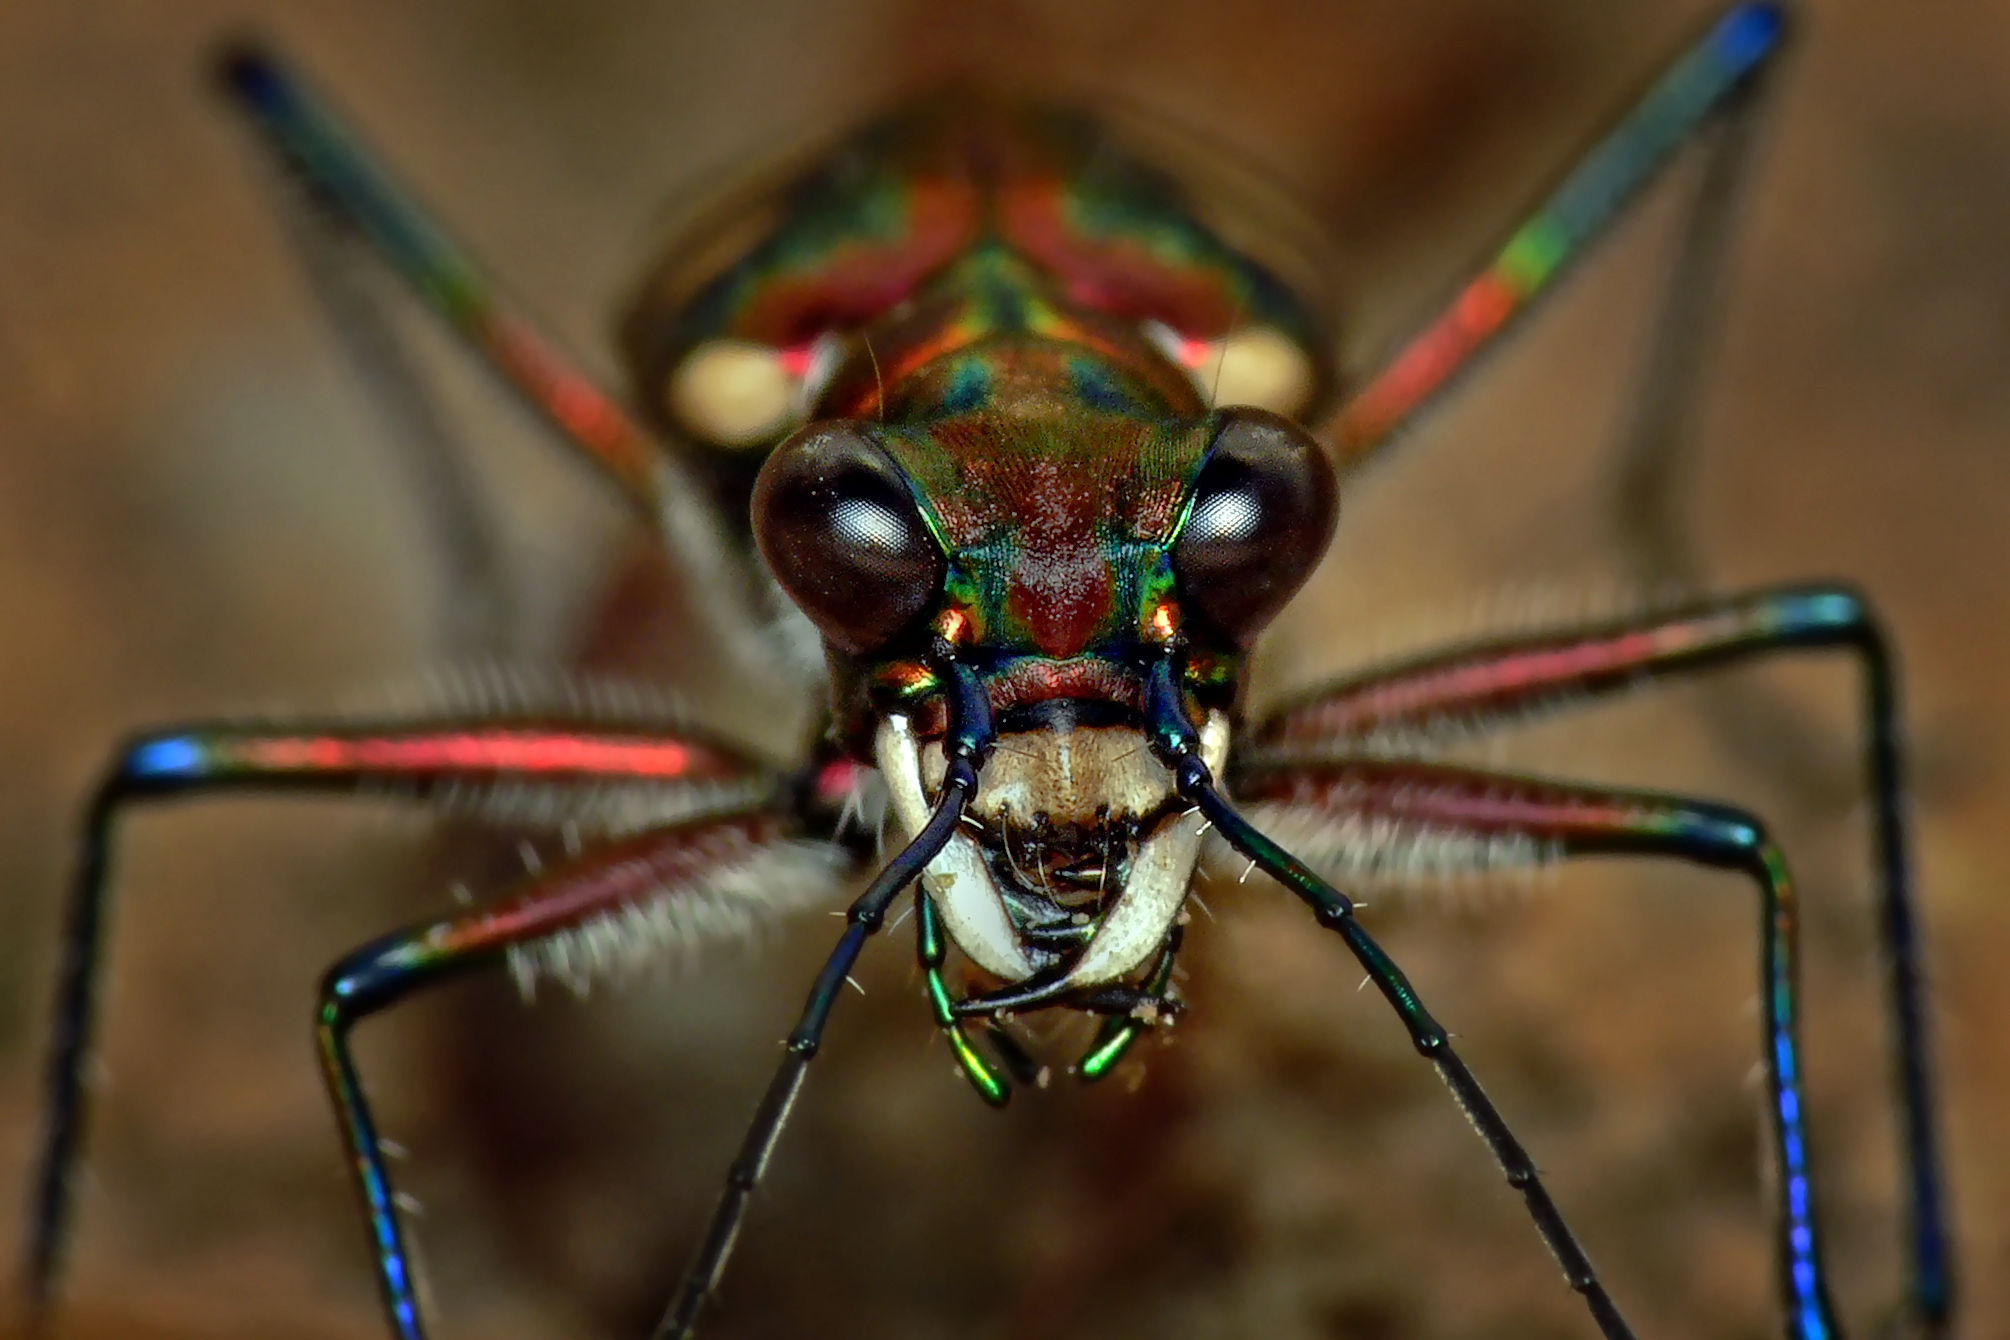 A stunning close-up of a colorful insect.